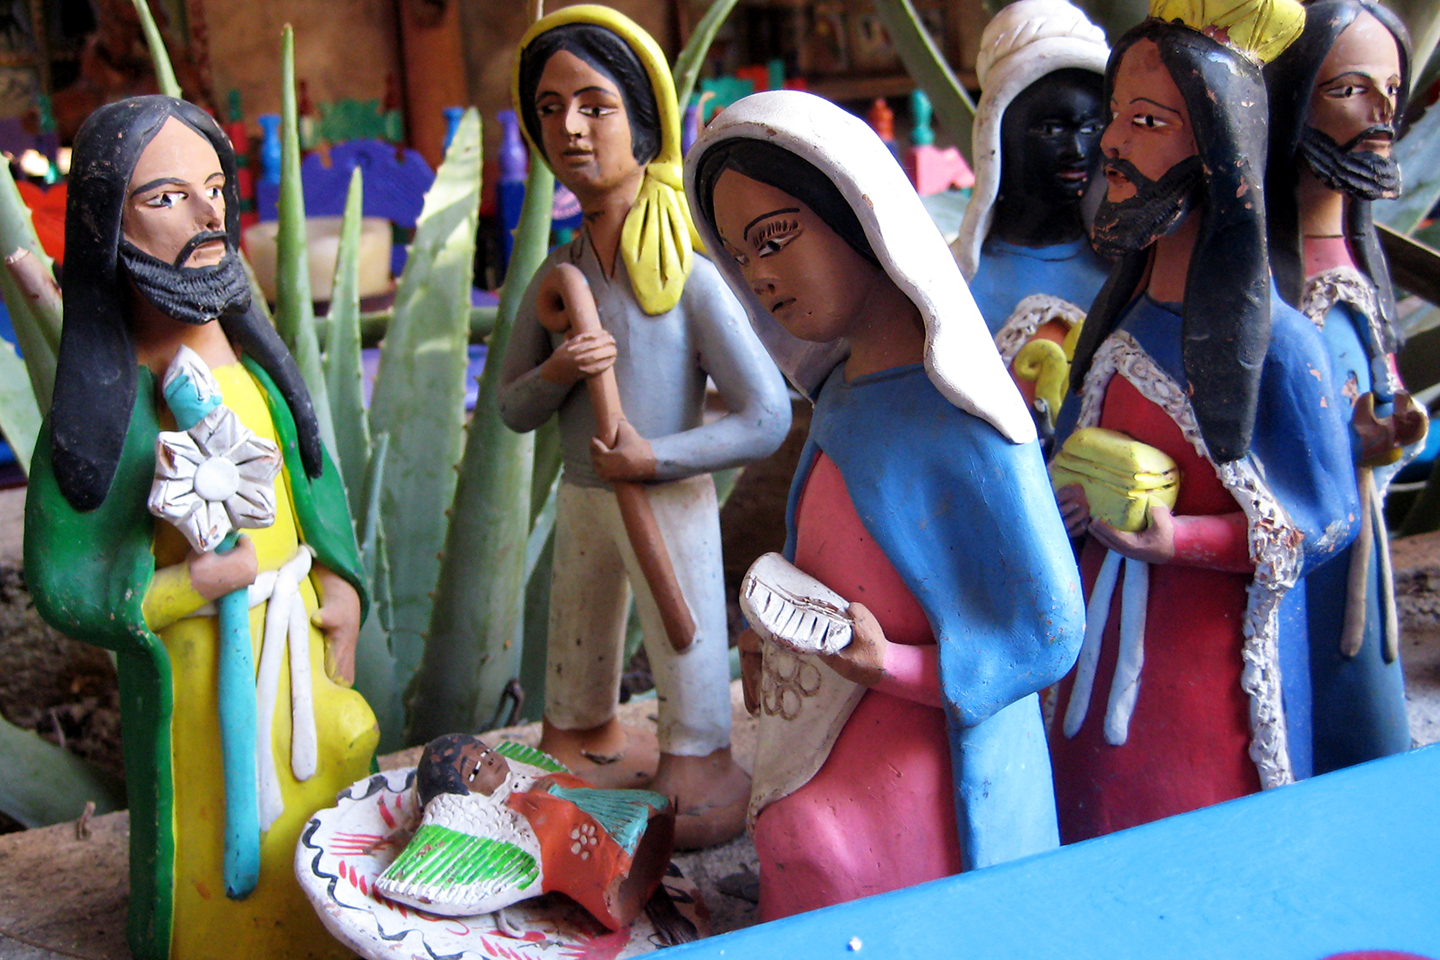 web-nativity-manger-christmas-mexico-flickr-get-directly-down-cc